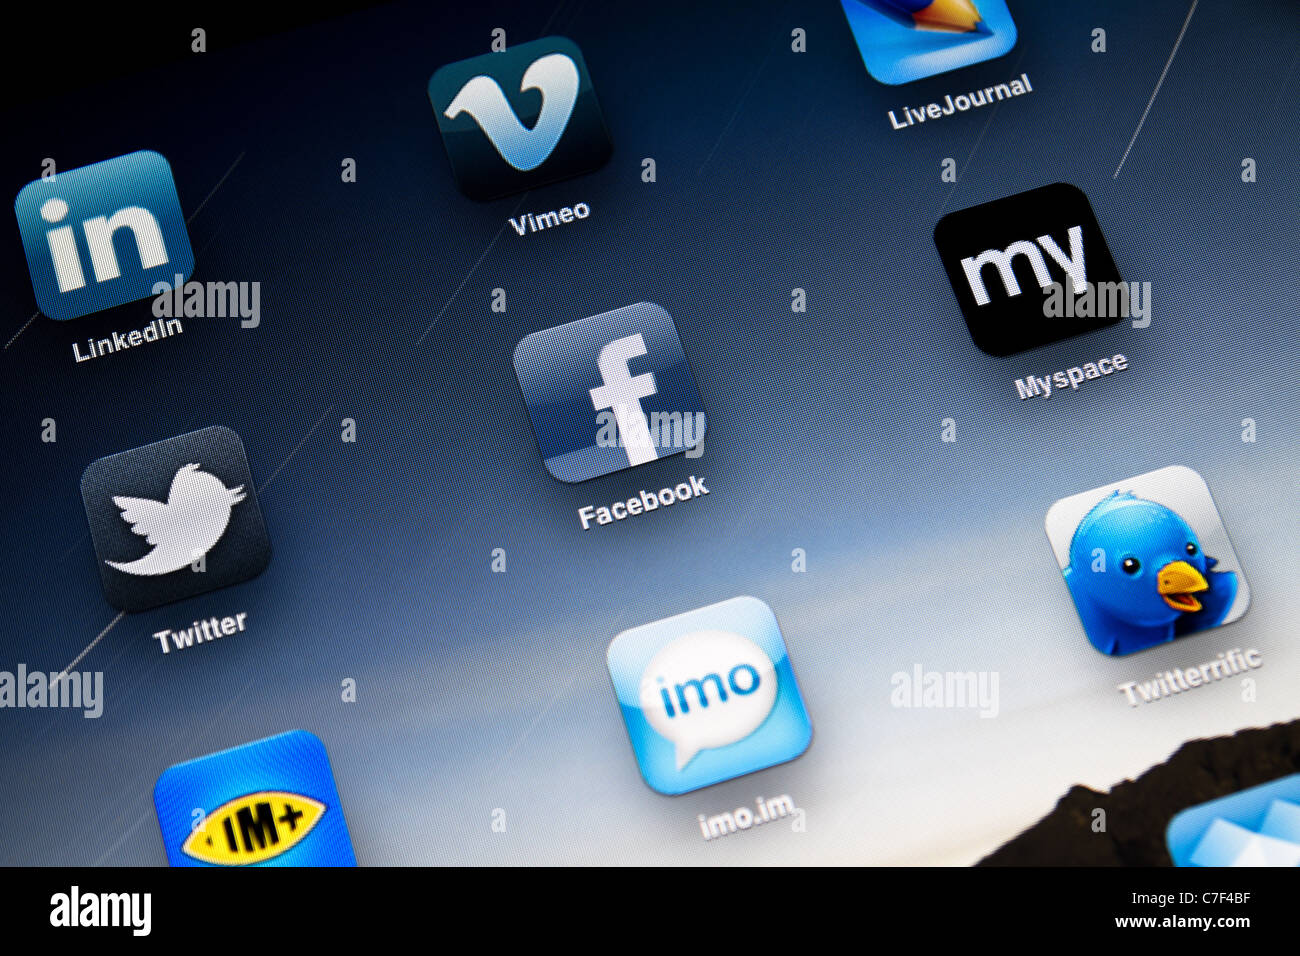 Apple iPad 2 screen showing social apps, including Facebook, Myspace, Twitter, LinkedIn, Vimeo, LiveJournal and Twitter. Stock Photo